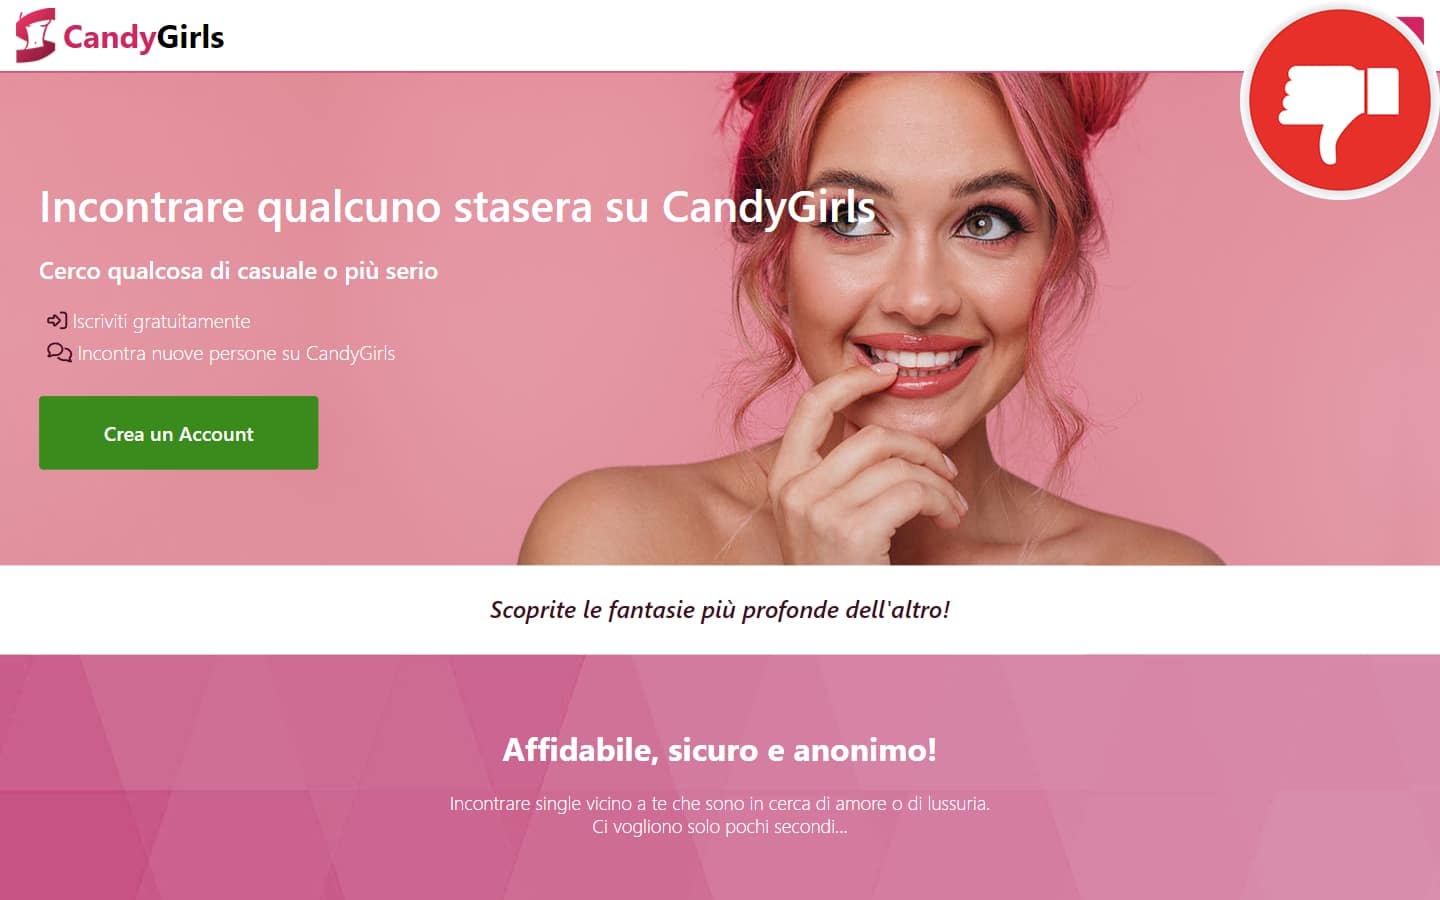 CandyGirls.it